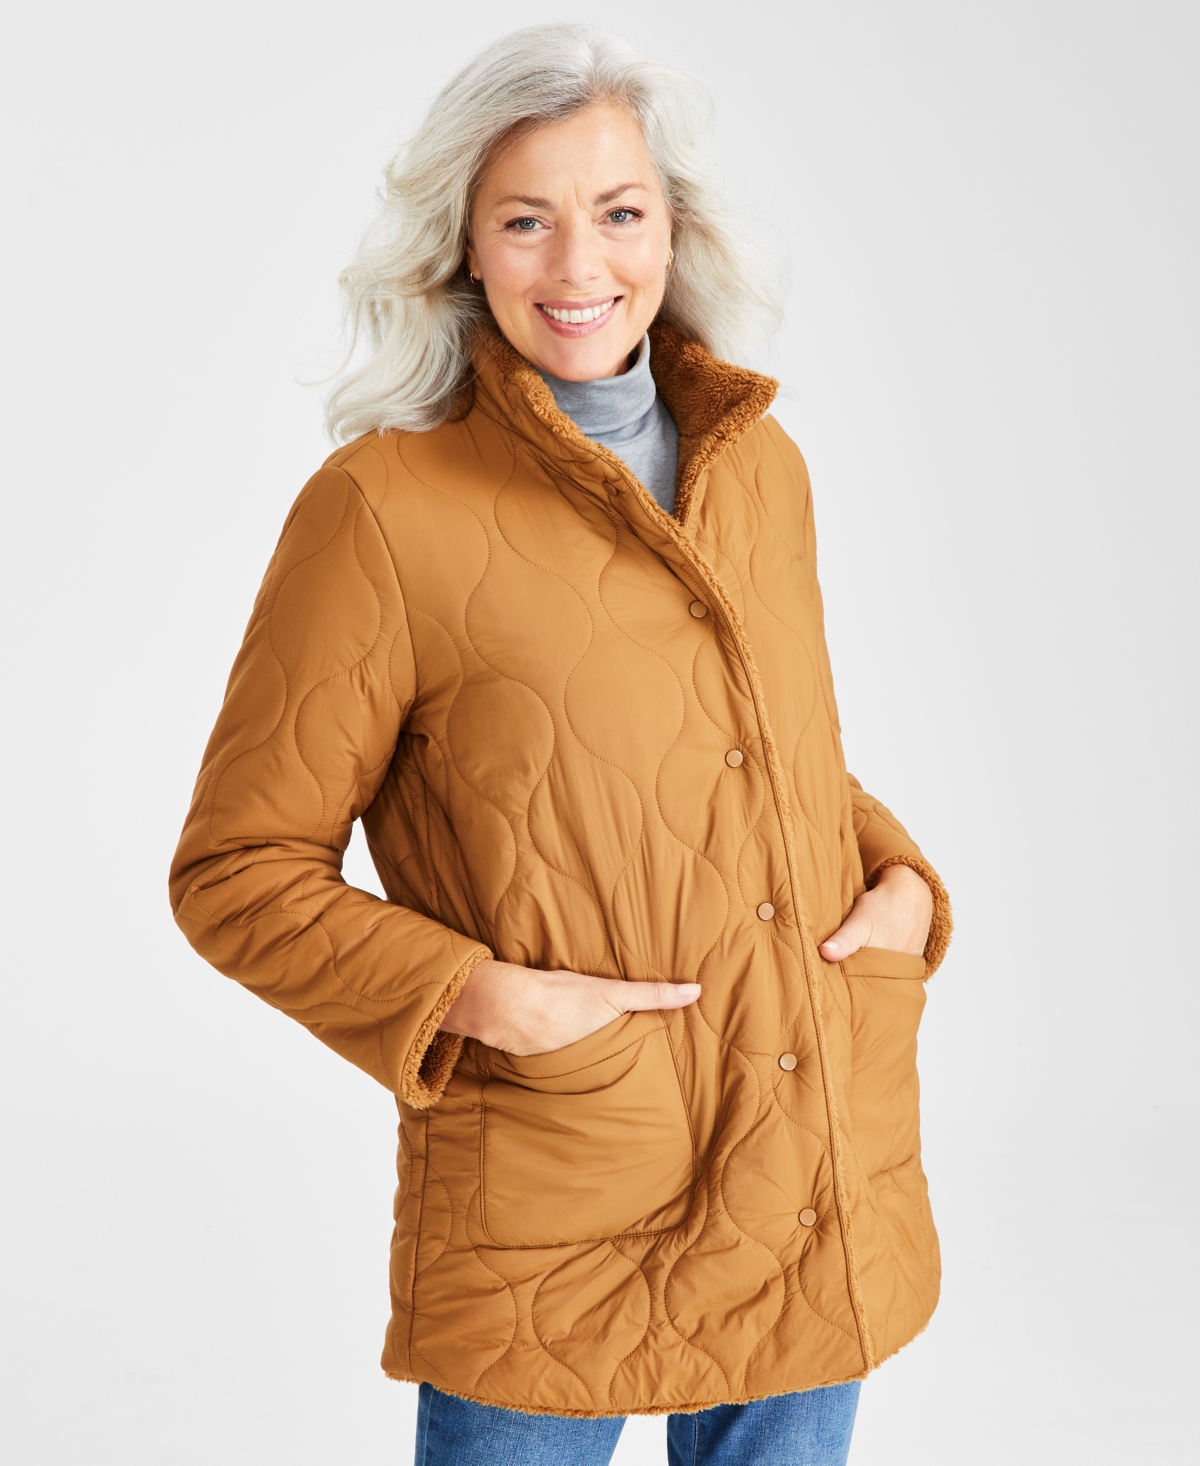 STYLE & CO WOMEN'S REVERSIBLE LONG-SLEEVES SHERPA JACKET, CREATED FOR MACY'S